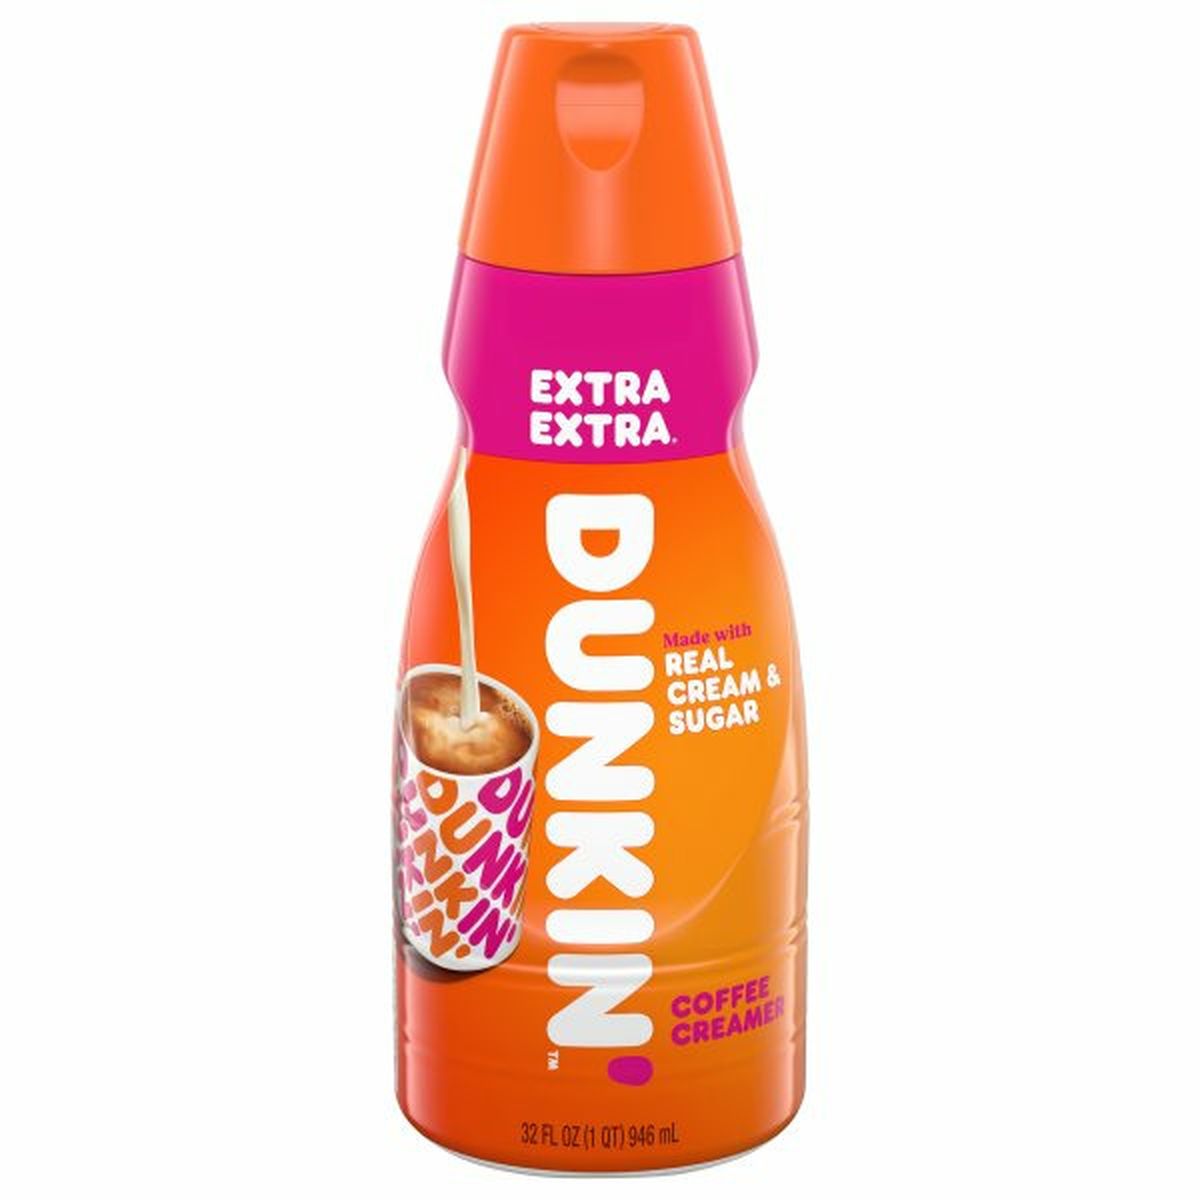 Calories in Dunkin' Coffee Creamer, Extra Extra